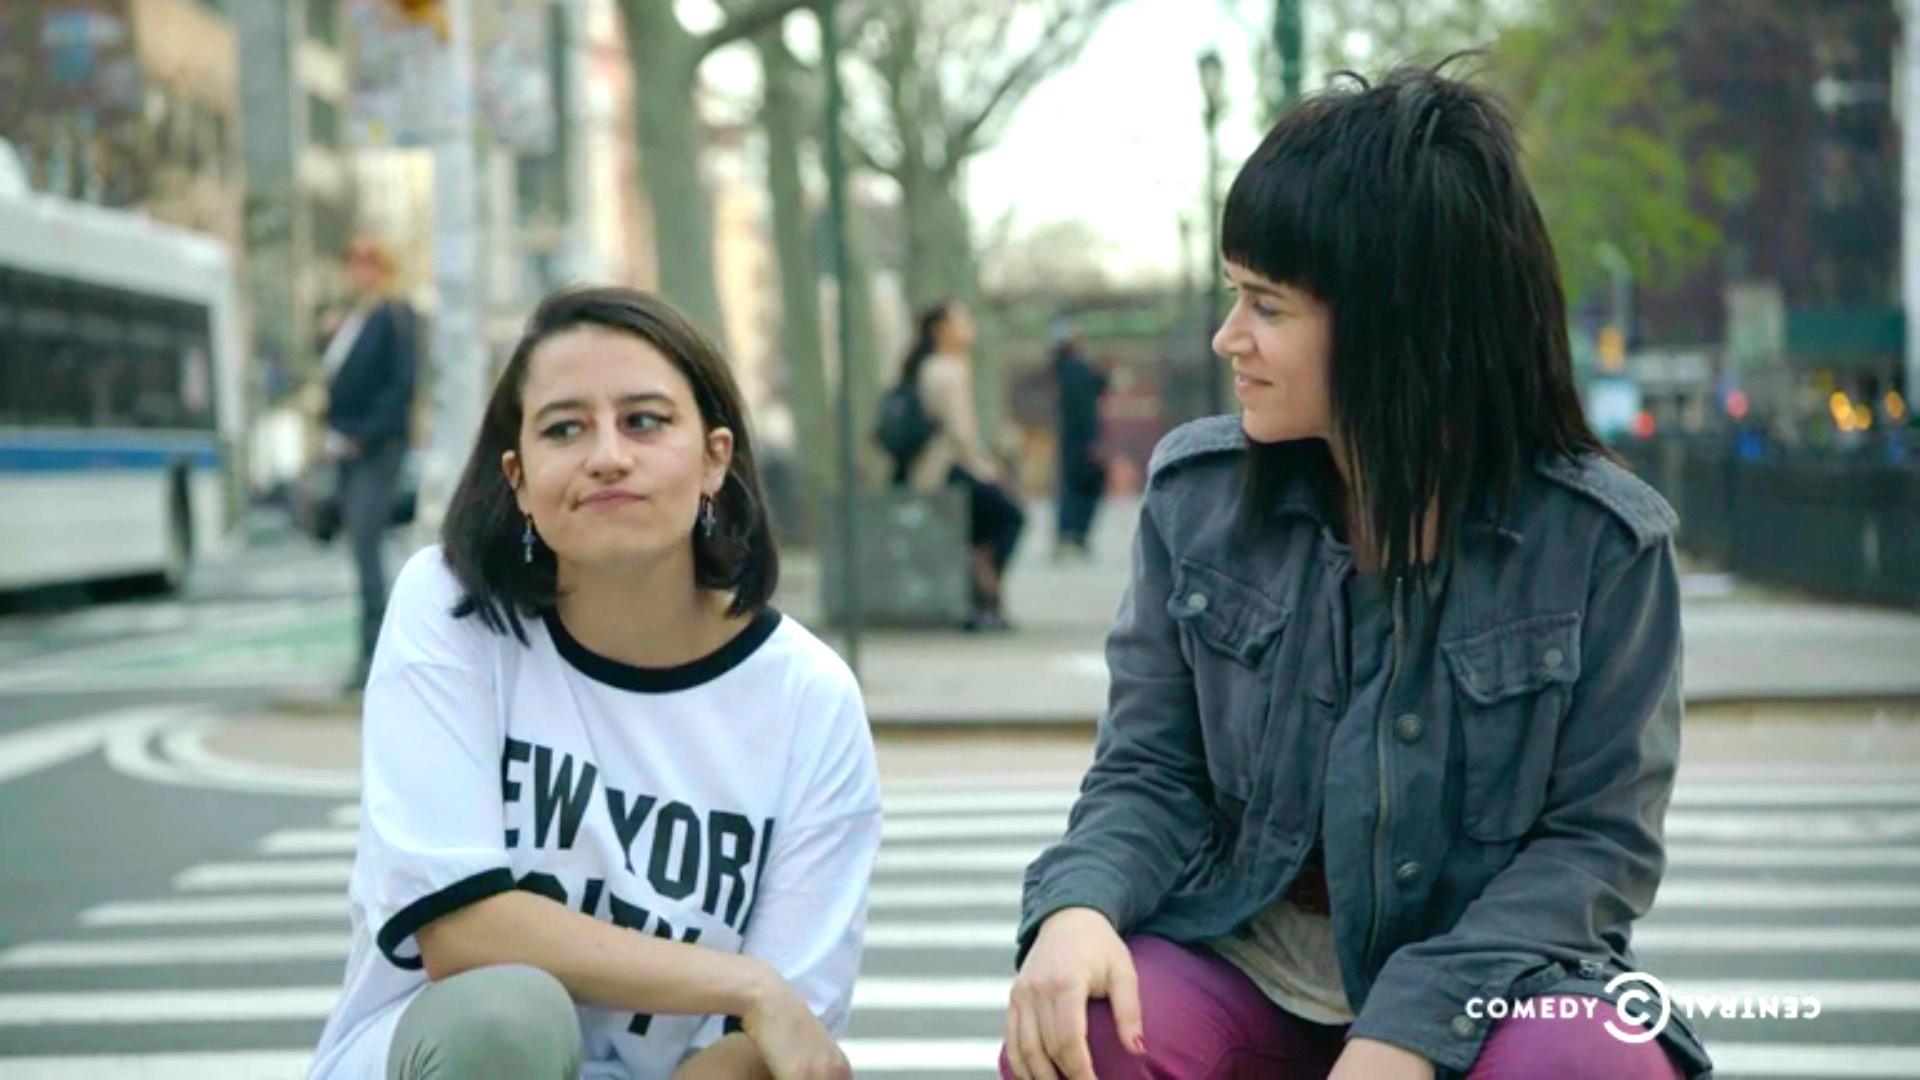 You Can Watch Broad City Season 4 Episode 1 Online For Free The